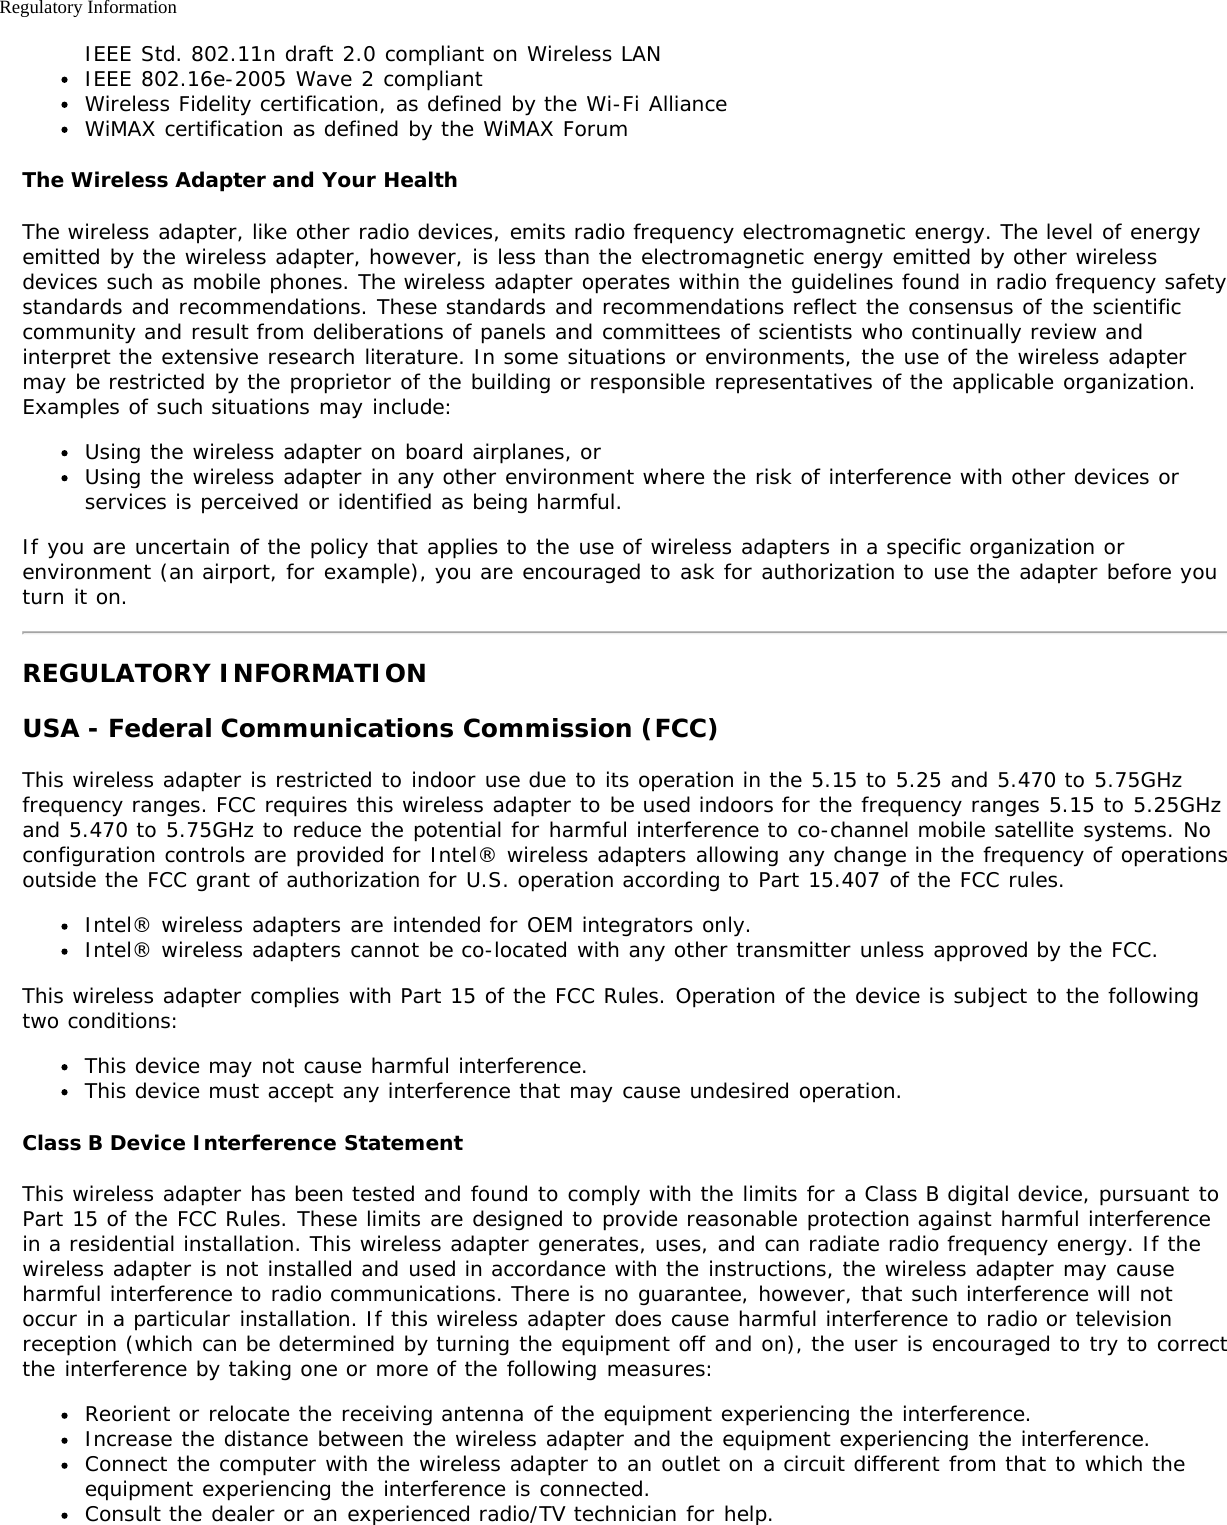 Regulatory InformationIEEE Std. 802.11n draft 2.0 compliant on Wireless LANIEEE 802.16e-2005 Wave 2 compliantWireless Fidelity certification, as defined by the Wi-Fi AllianceWiMAX certification as defined by the WiMAX ForumThe Wireless Adapter and Your HealthThe wireless adapter, like other radio devices, emits radio frequency electromagnetic energy. The level of energyemitted by the wireless adapter, however, is less than the electromagnetic energy emitted by other wirelessdevices such as mobile phones. The wireless adapter operates within the guidelines found in radio frequency safetystandards and recommendations. These standards and recommendations reflect the consensus of the scientificcommunity and result from deliberations of panels and committees of scientists who continually review andinterpret the extensive research literature. In some situations or environments, the use of the wireless adaptermay be restricted by the proprietor of the building or responsible representatives of the applicable organization.Examples of such situations may include:Using the wireless adapter on board airplanes, orUsing the wireless adapter in any other environment where the risk of interference with other devices orservices is perceived or identified as being harmful.If you are uncertain of the policy that applies to the use of wireless adapters in a specific organization orenvironment (an airport, for example), you are encouraged to ask for authorization to use the adapter before youturn it on.REGULATORY INFORMATIONUSA - Federal Communications Commission (FCC)This wireless adapter is restricted to indoor use due to its operation in the 5.15 to 5.25 and 5.470 to 5.75GHzfrequency ranges. FCC requires this wireless adapter to be used indoors for the frequency ranges 5.15 to 5.25GHzand 5.470 to 5.75GHz to reduce the potential for harmful interference to co-channel mobile satellite systems. Noconfiguration controls are provided for Intel® wireless adapters allowing any change in the frequency of operationsoutside the FCC grant of authorization for U.S. operation according to Part 15.407 of the FCC rules.Intel® wireless adapters are intended for OEM integrators only.Intel® wireless adapters cannot be co-located with any other transmitter unless approved by the FCC.This wireless adapter complies with Part 15 of the FCC Rules. Operation of the device is subject to the followingtwo conditions:This device may not cause harmful interference.This device must accept any interference that may cause undesired operation.Class B Device Interference StatementThis wireless adapter has been tested and found to comply with the limits for a Class B digital device, pursuant toPart 15 of the FCC Rules. These limits are designed to provide reasonable protection against harmful interferencein a residential installation. This wireless adapter generates, uses, and can radiate radio frequency energy. If thewireless adapter is not installed and used in accordance with the instructions, the wireless adapter may causeharmful interference to radio communications. There is no guarantee, however, that such interference will notoccur in a particular installation. If this wireless adapter does cause harmful interference to radio or televisionreception (which can be determined by turning the equipment off and on), the user is encouraged to try to correctthe interference by taking one or more of the following measures:Reorient or relocate the receiving antenna of the equipment experiencing the interference.Increase the distance between the wireless adapter and the equipment experiencing the interference.Connect the computer with the wireless adapter to an outlet on a circuit different from that to which theequipment experiencing the interference is connected.Consult the dealer or an experienced radio/TV technician for help.